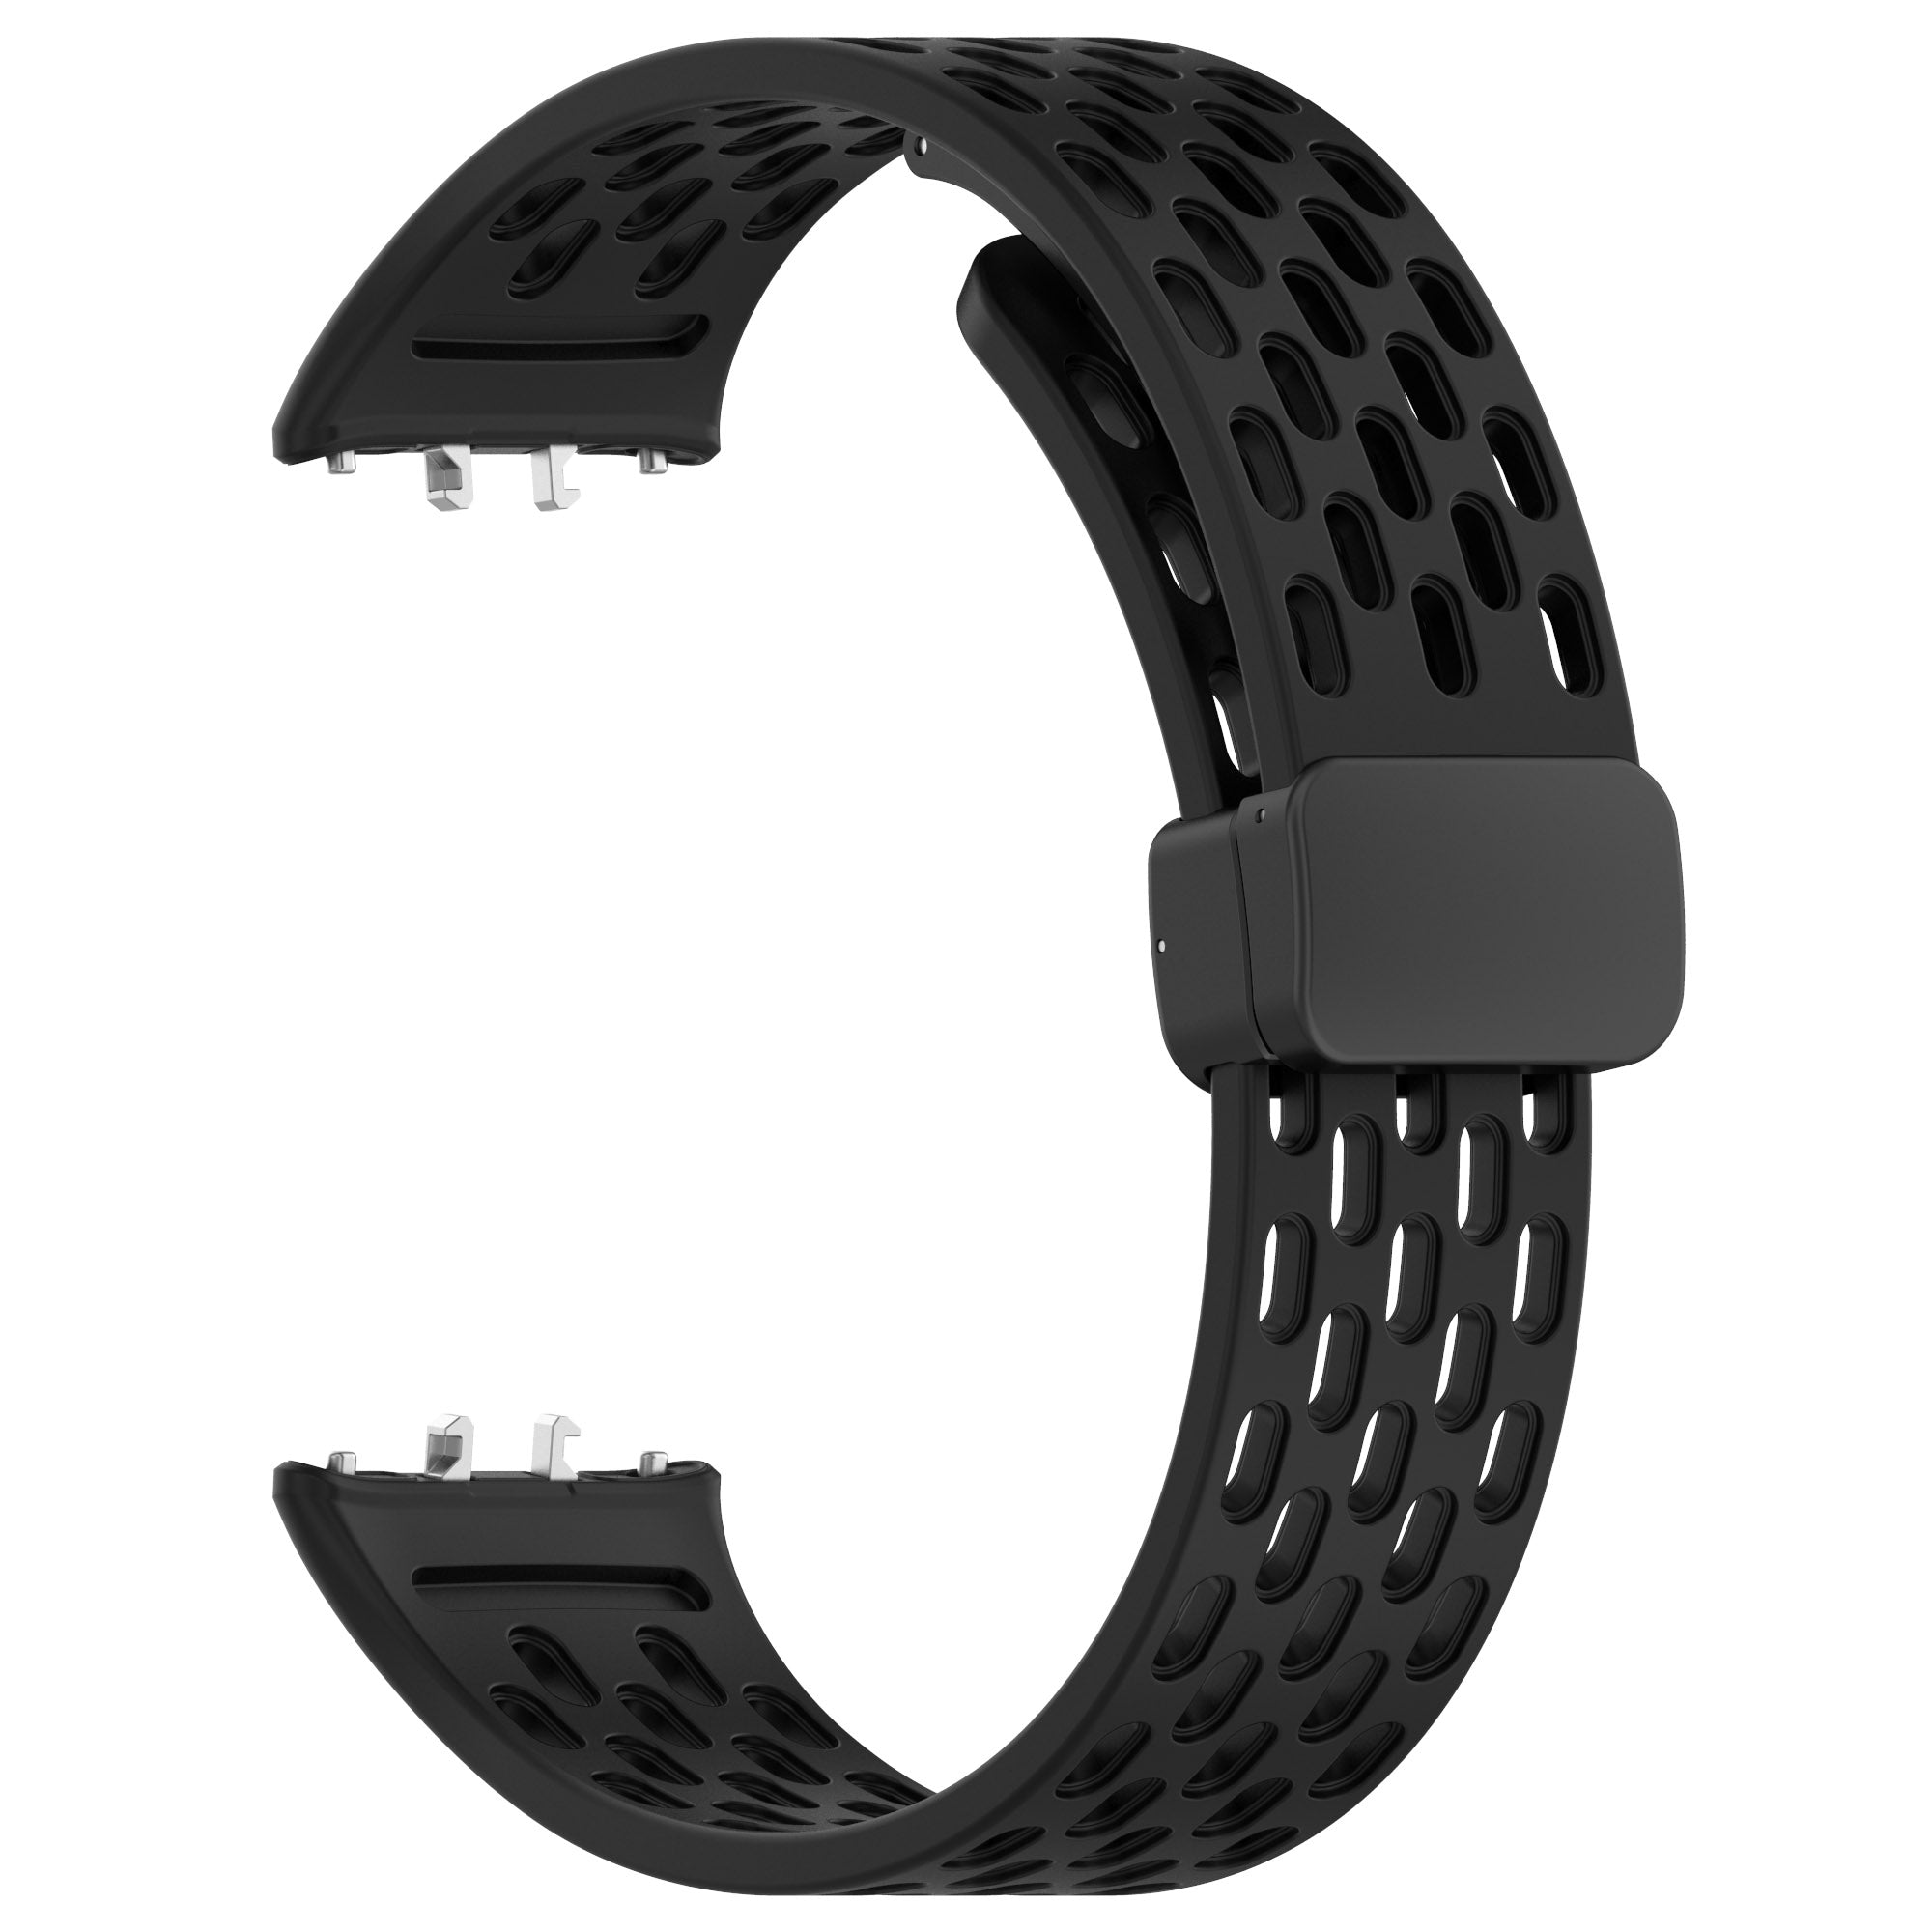 Wrist Band for Samsung Galaxy Fit3 R930 Magnetic Silicone Smartwatch Bracelet Strap - Black